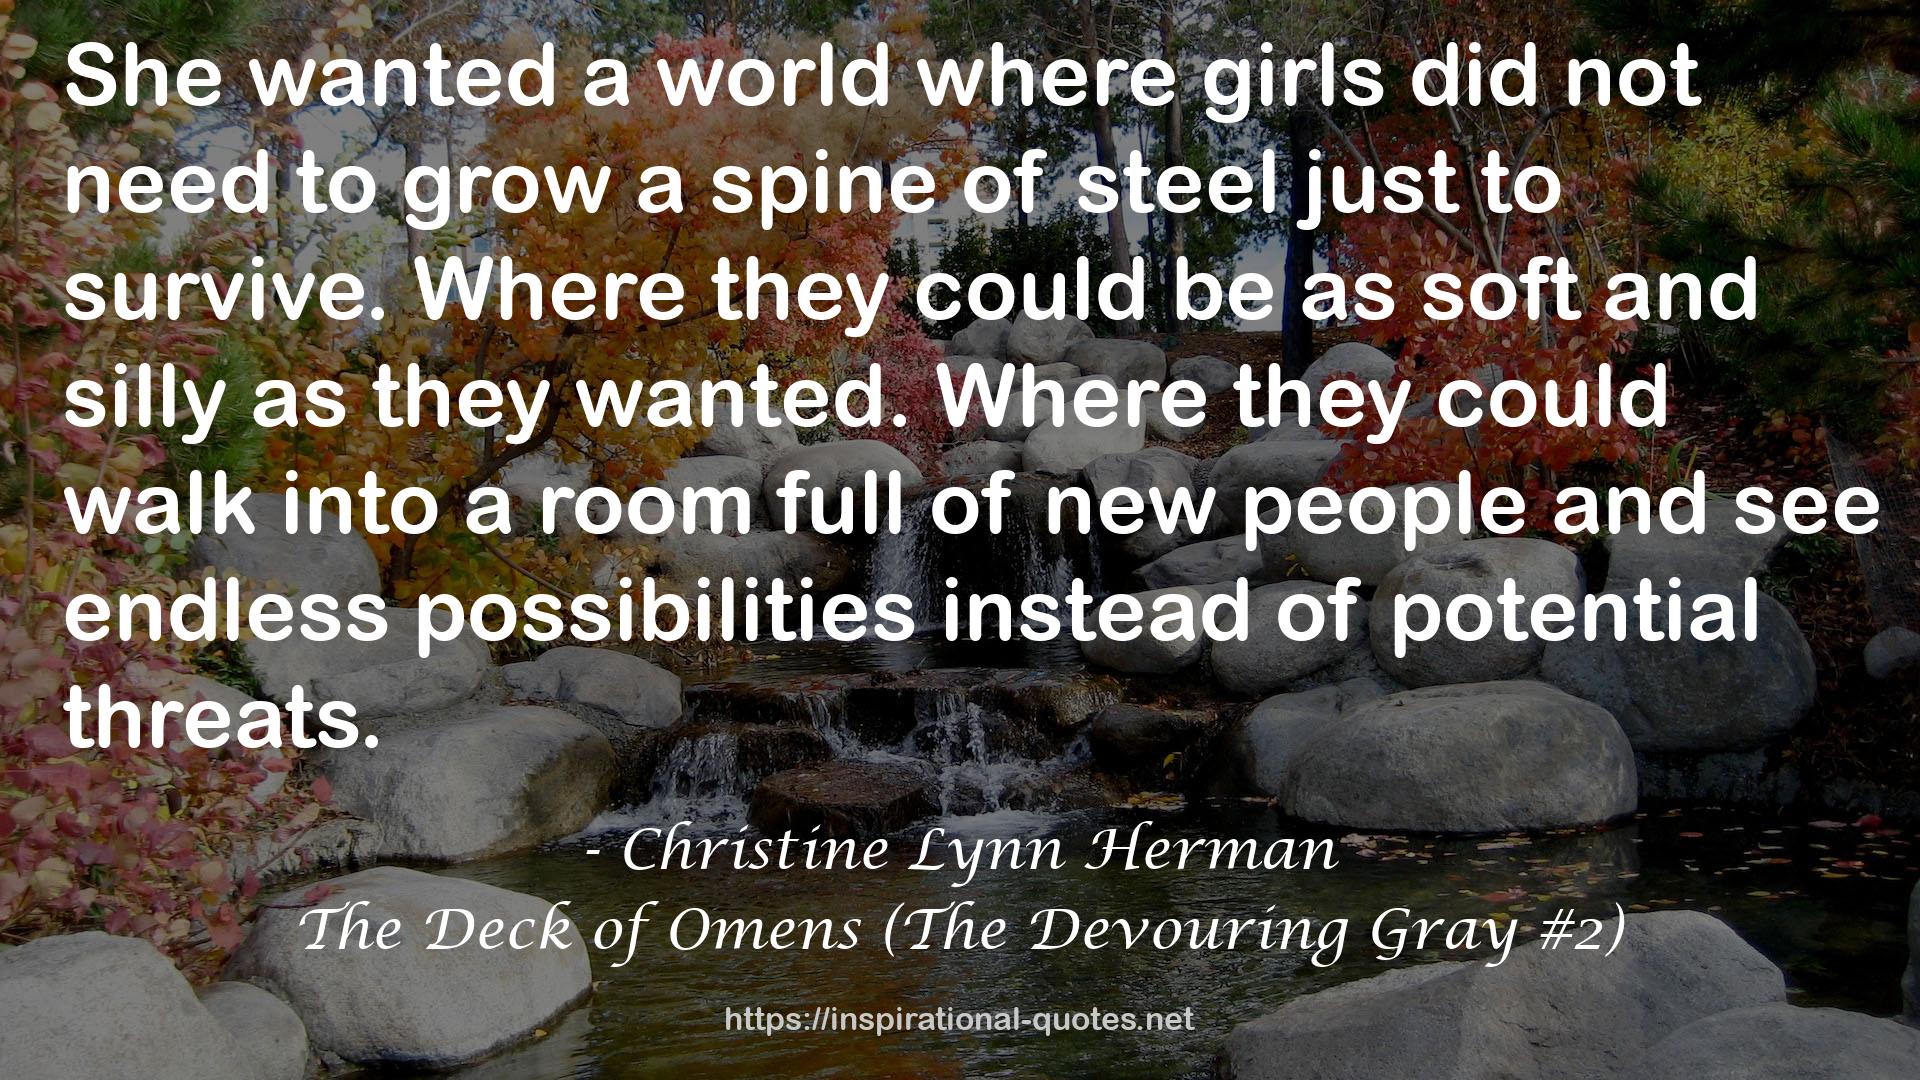 The Deck of Omens (The Devouring Gray #2) QUOTES